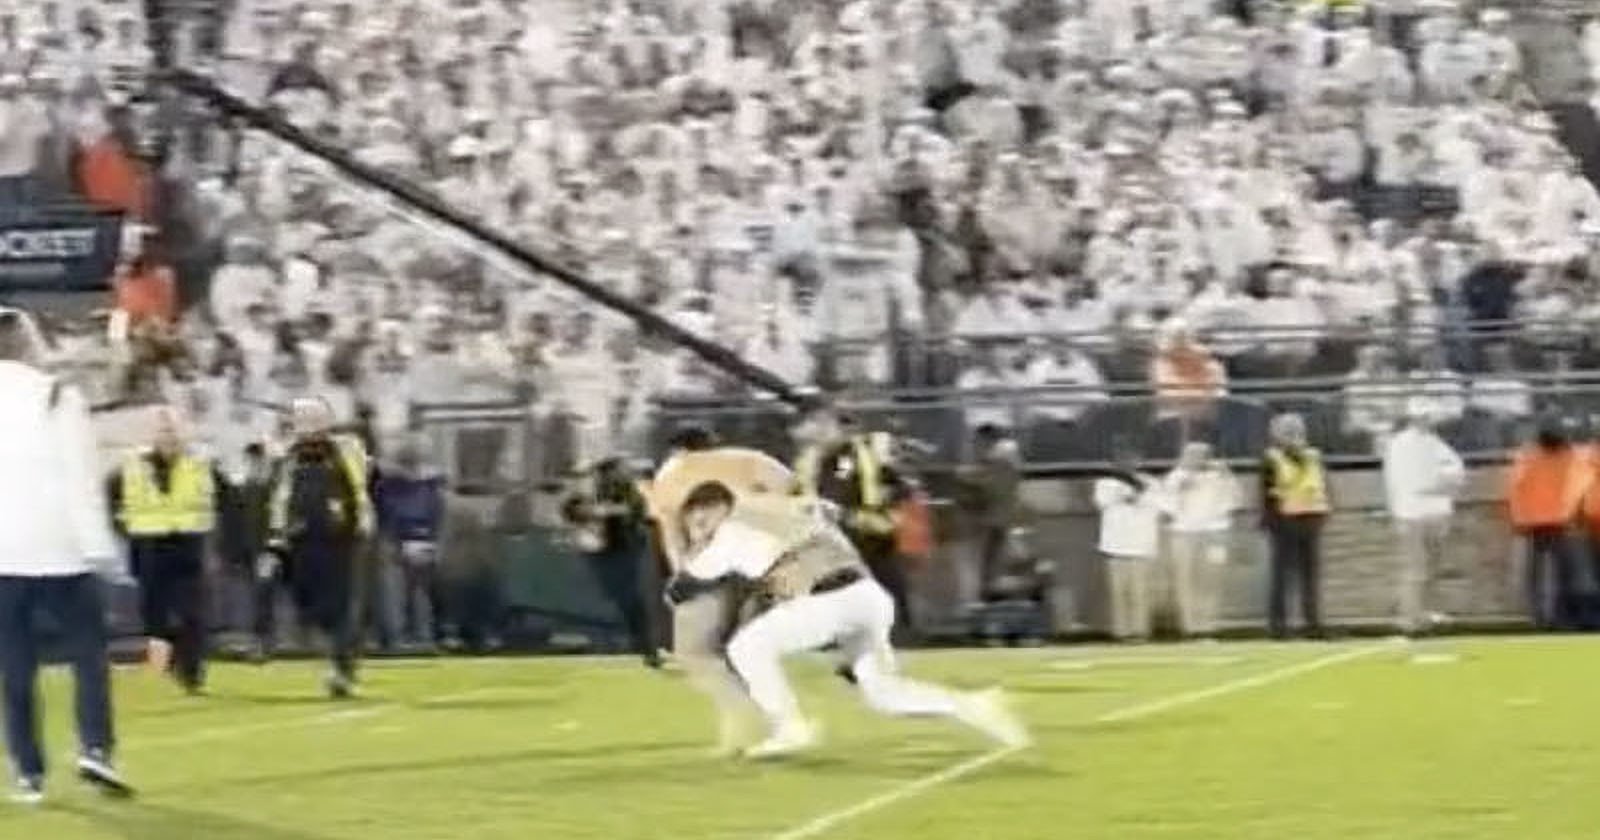  photographer tackles fan who ran field during college 